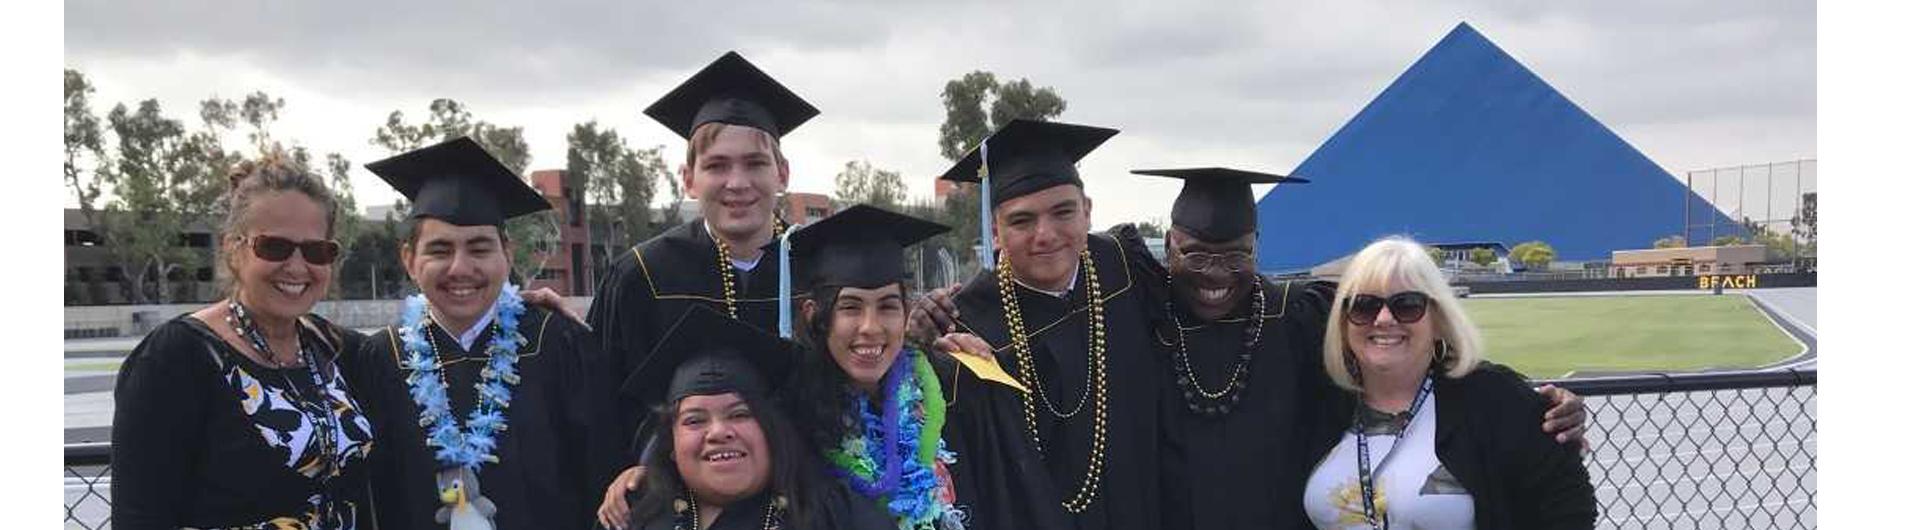 ACT Students at 2018 CSULB Commencement Ceremony